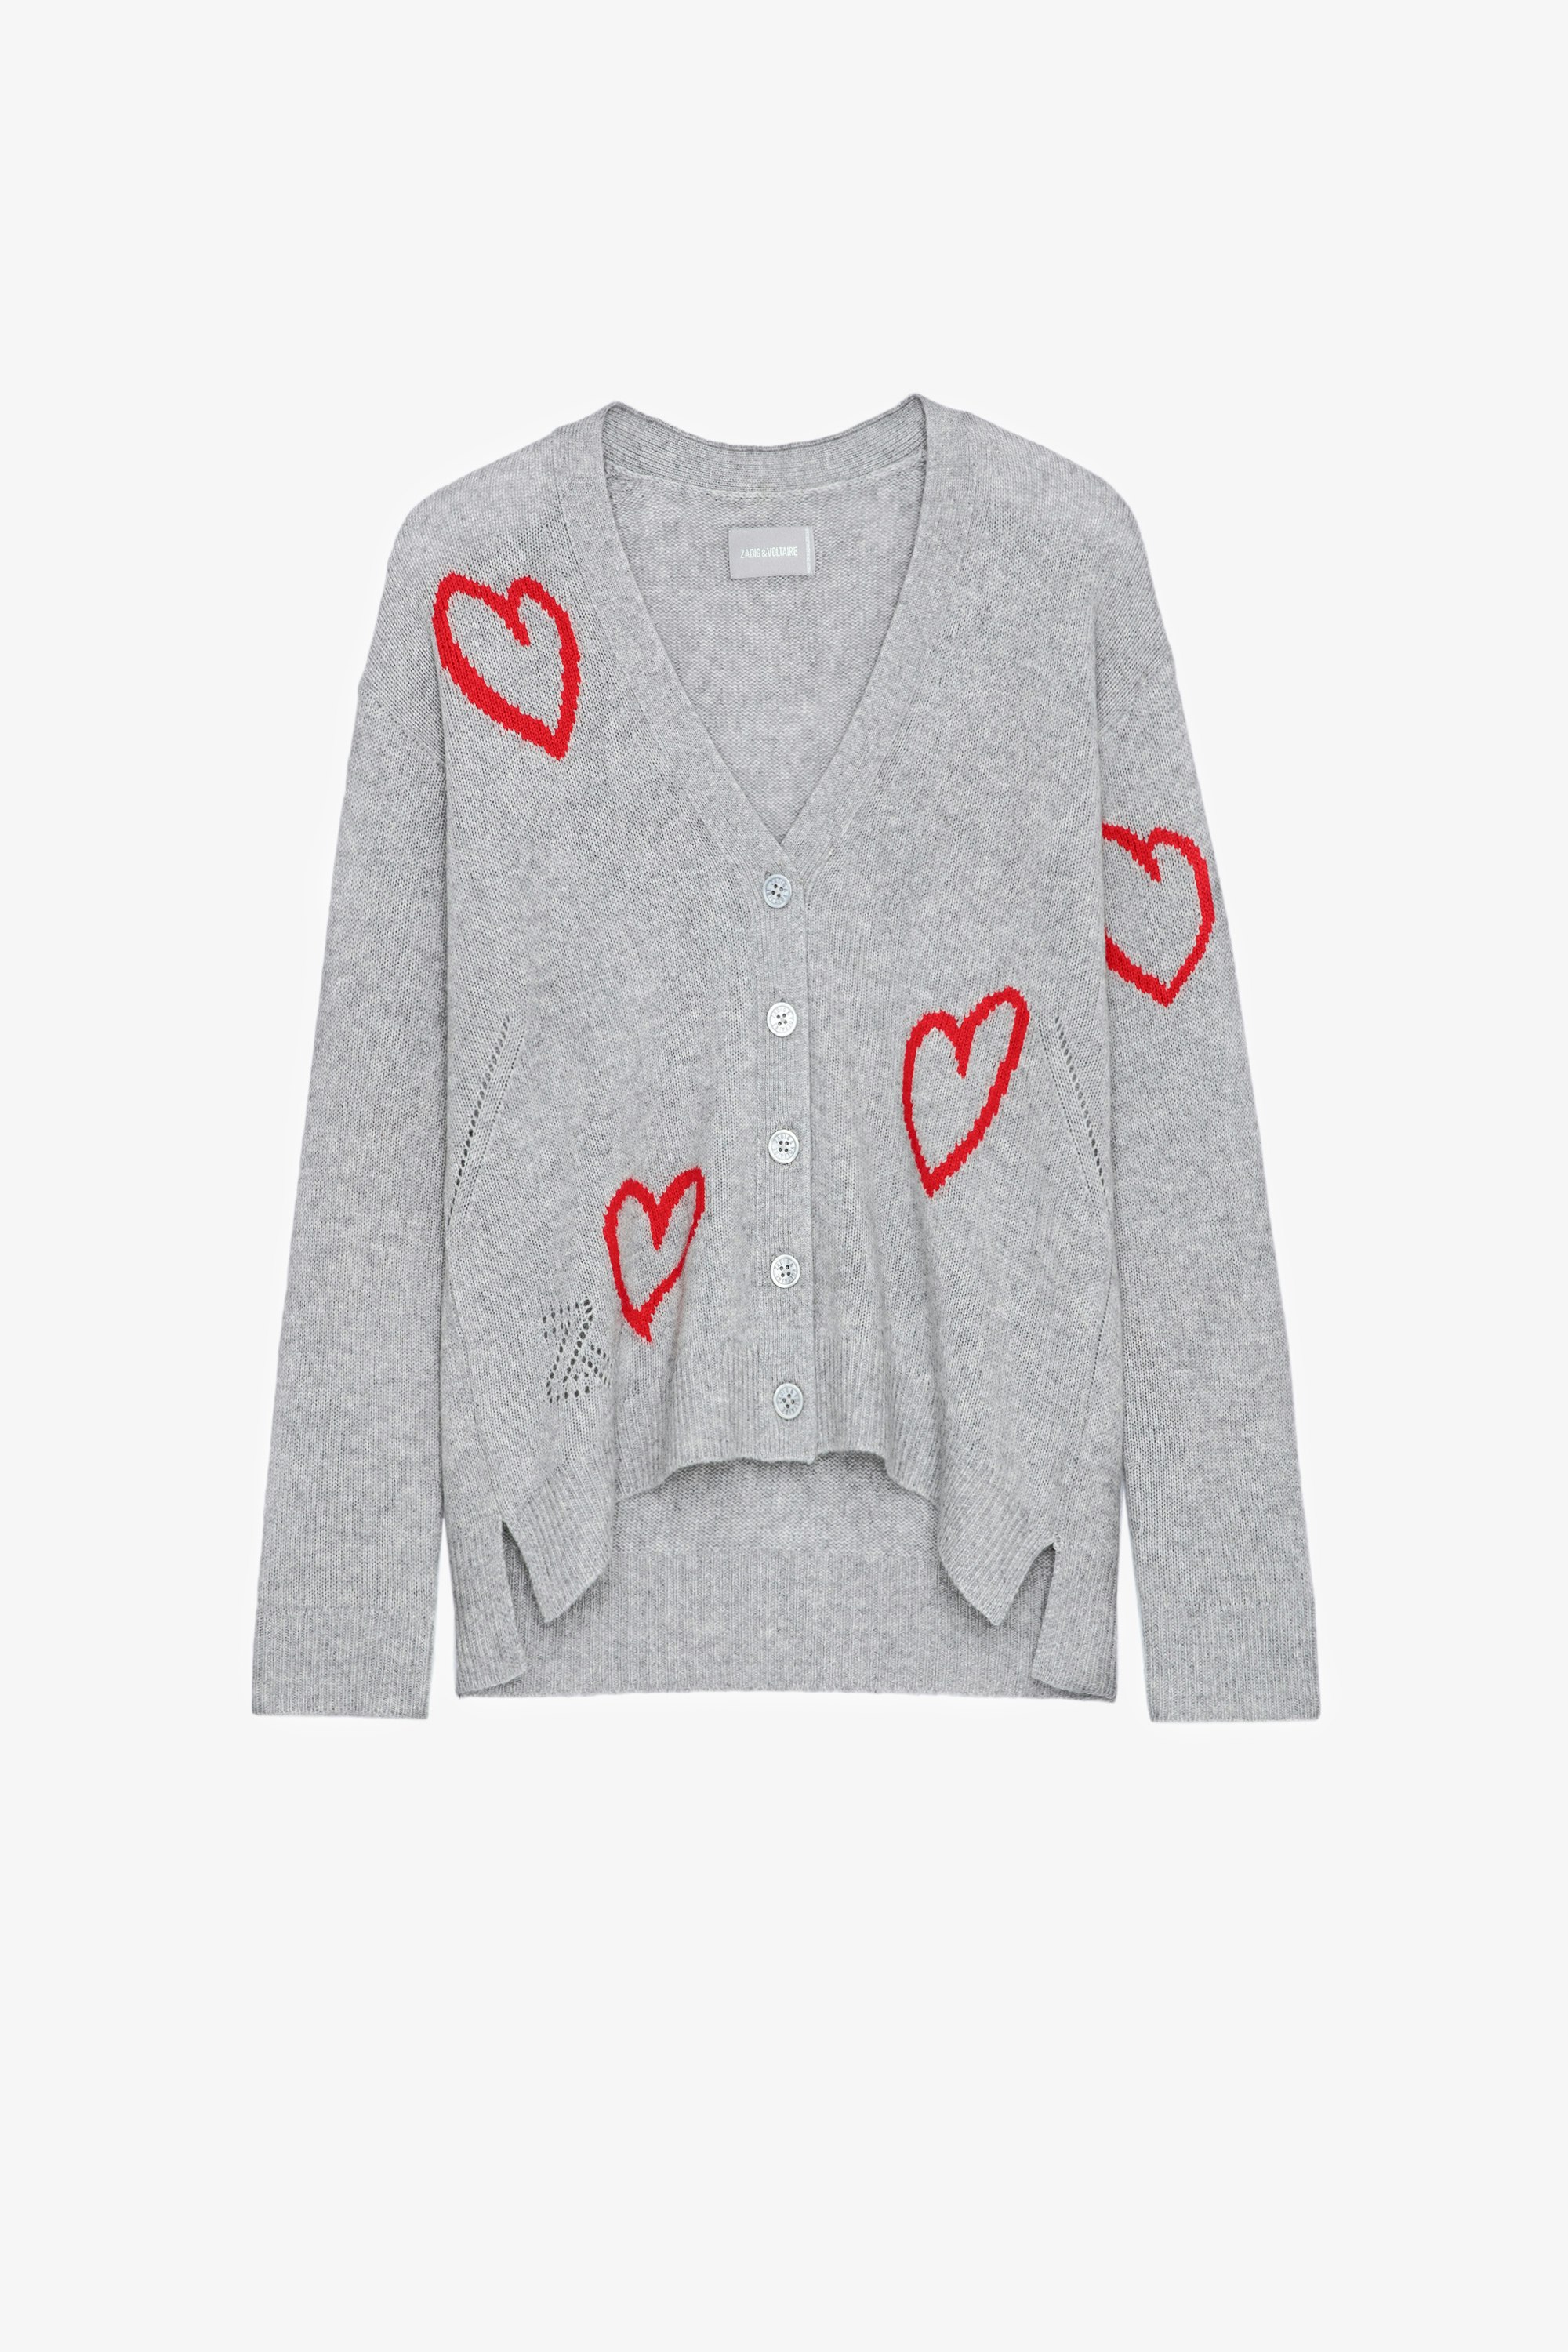 Mirka Cashmere Cardigan Women’s grey cashmere cardigan with contrasting hearts